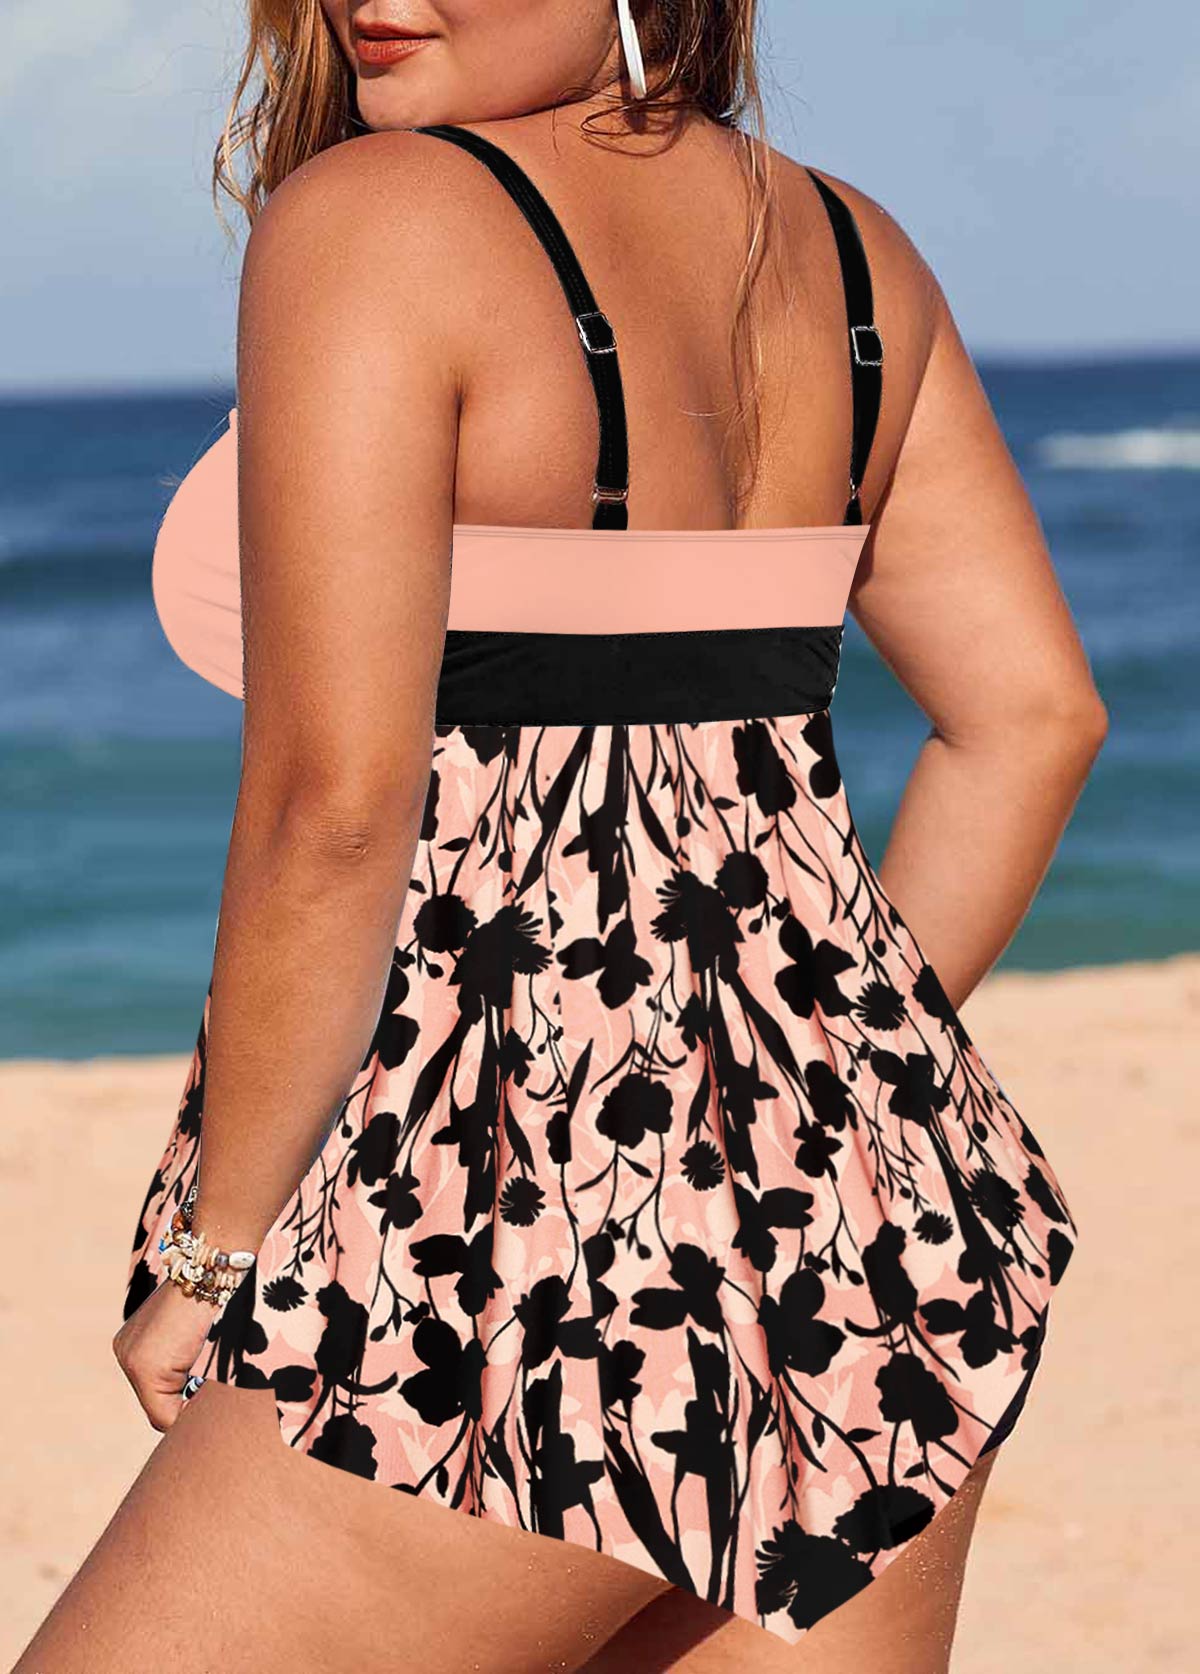 Floral Print Lace Up Pink Swimdress Top-No Bottom